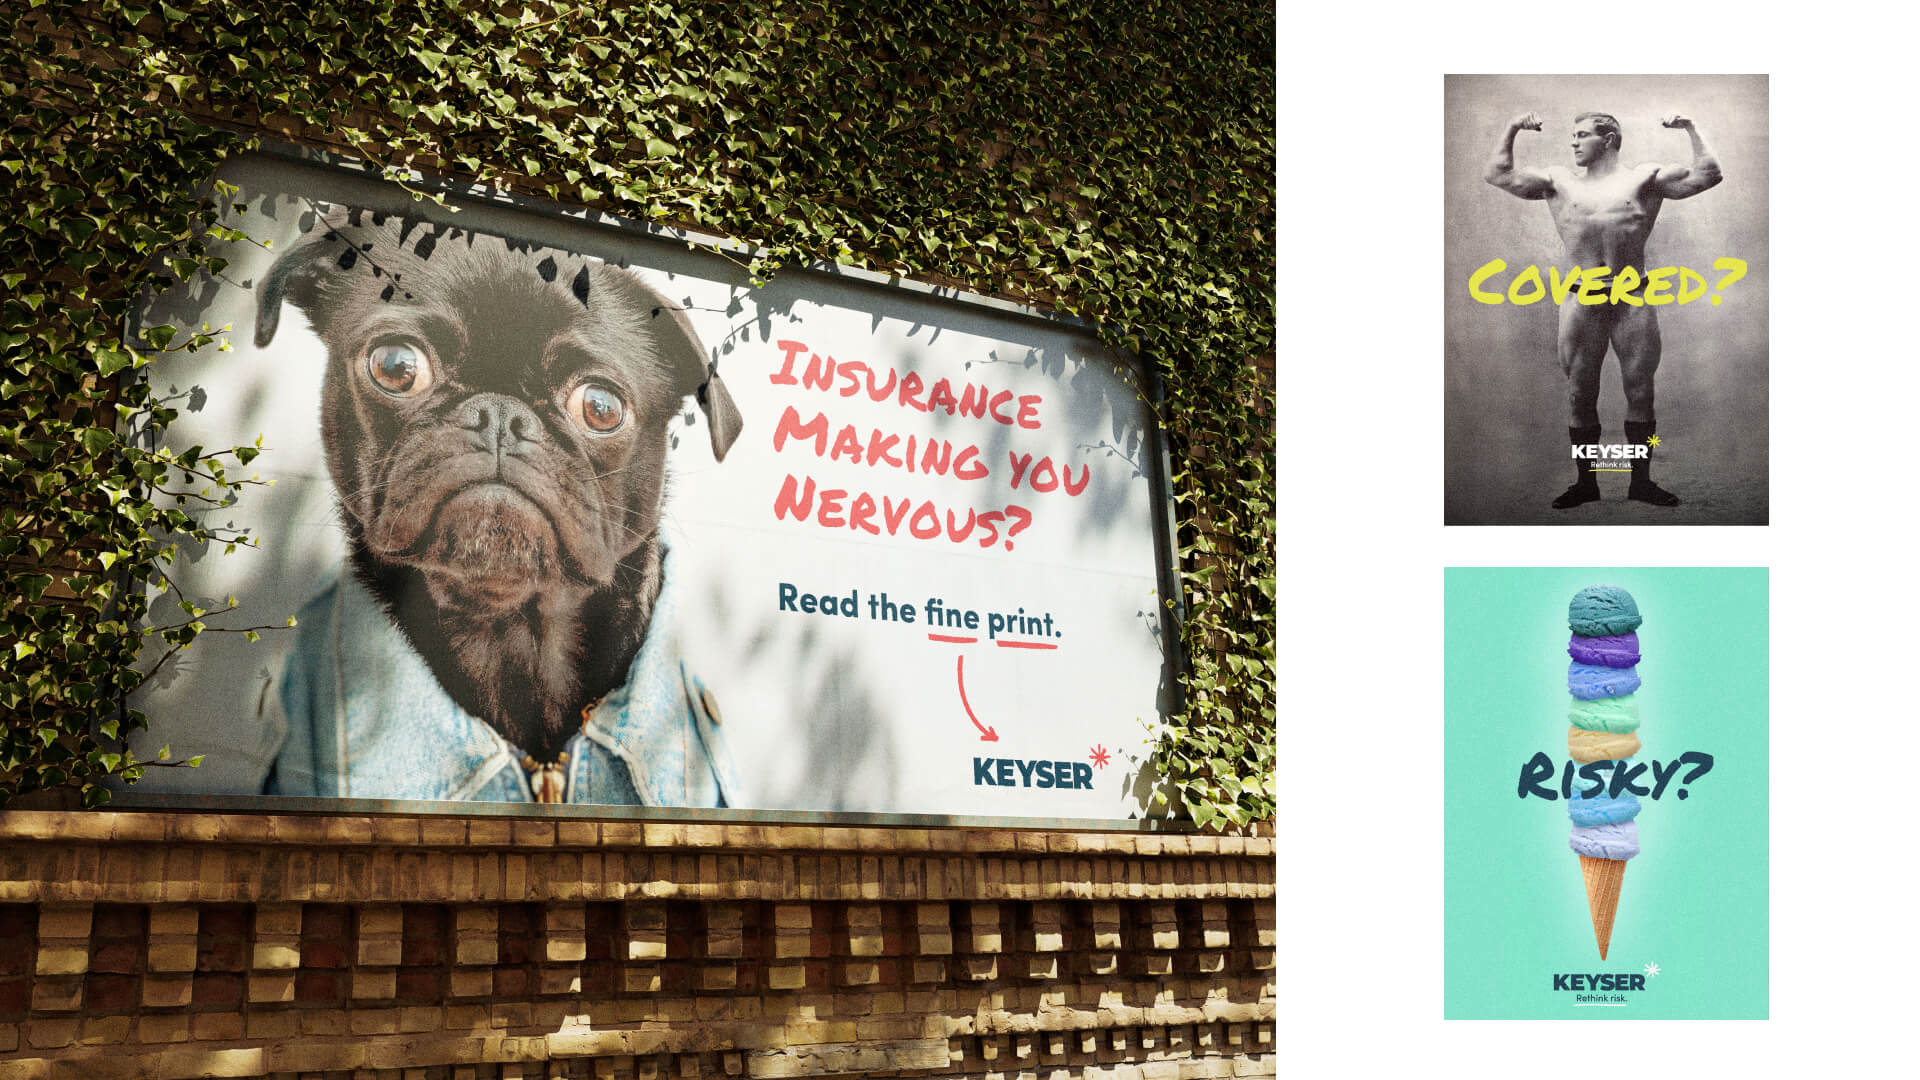 Collage of images showing the marketing design. The left image is a billboard that says "Insurance Making You Nervous? Read the fine print." with a pug on the left. The right images include a poster of a body builder with the "Covered?" phrase over his waist. The bottom image shows an ice cream cone stacked with scoops and the word "Risky" over it.